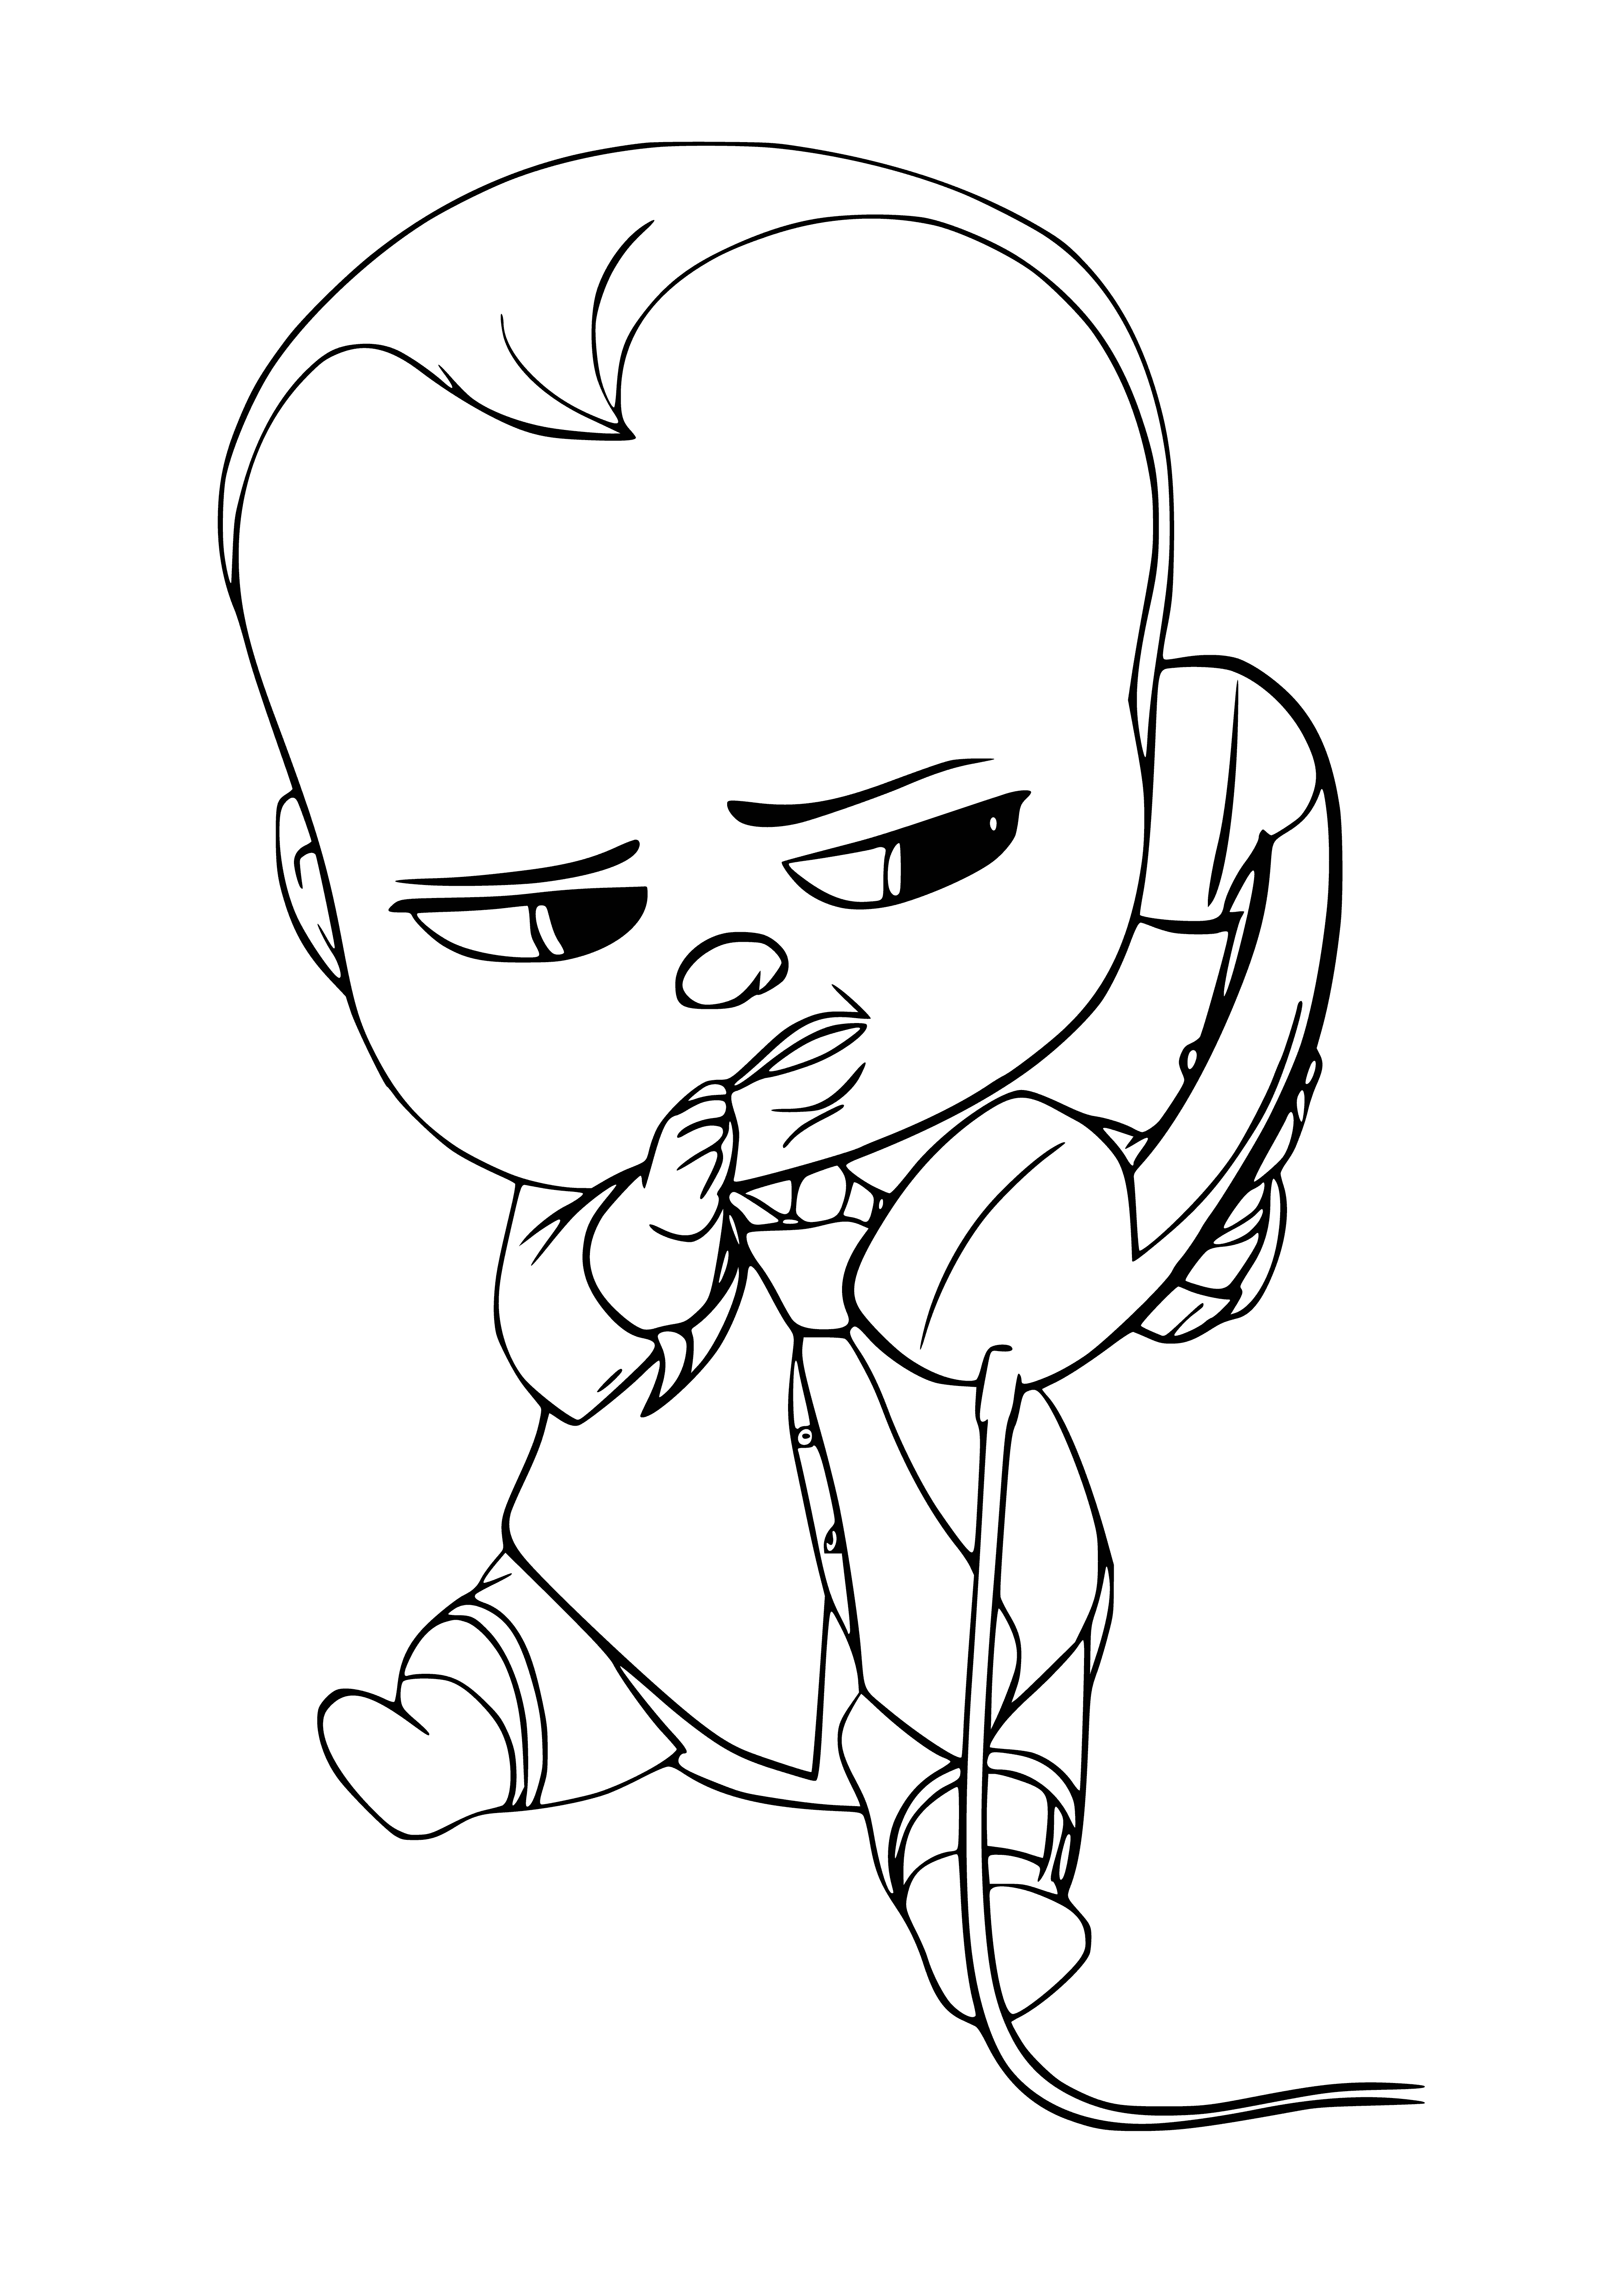 coloring page: Adorable baby boy in blue suit & tie sits in high chair with phone receiver & briefcase.